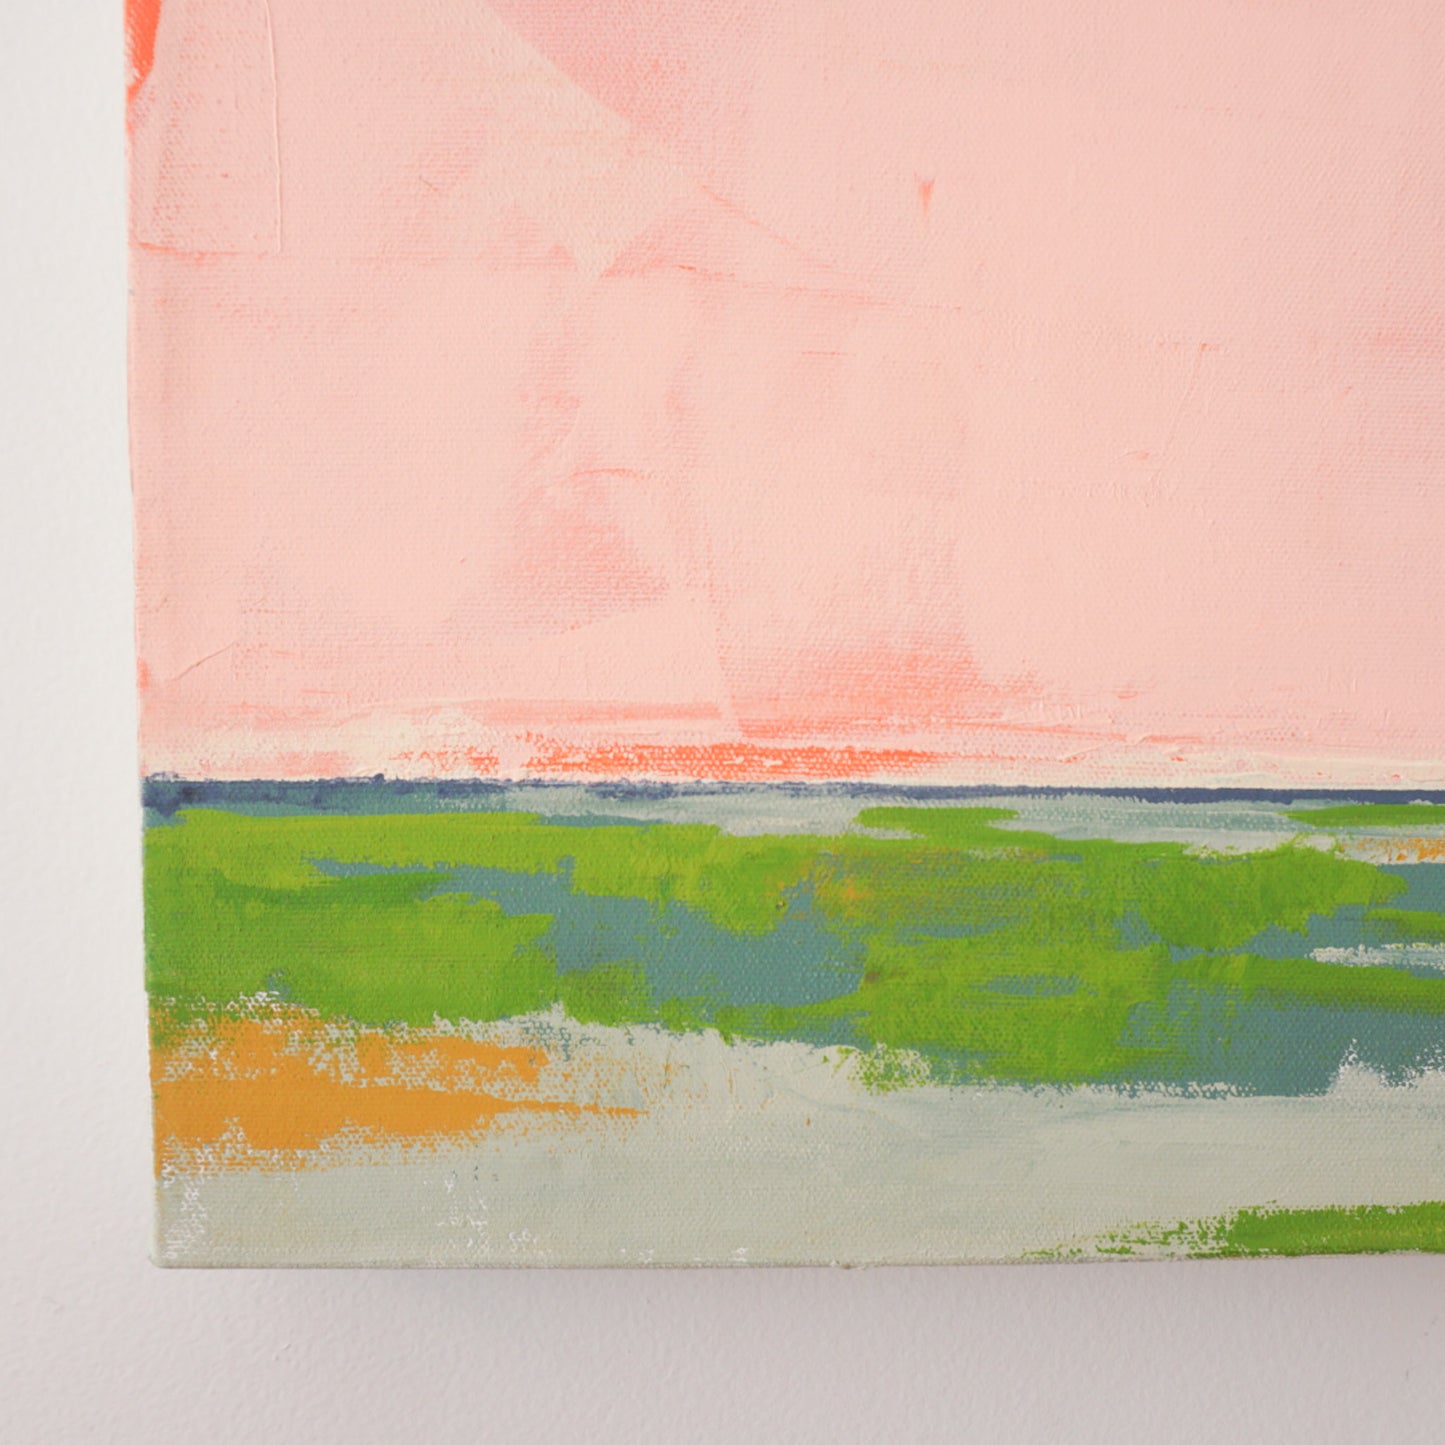 Close up of original painting on canvas. Green, orange, pink